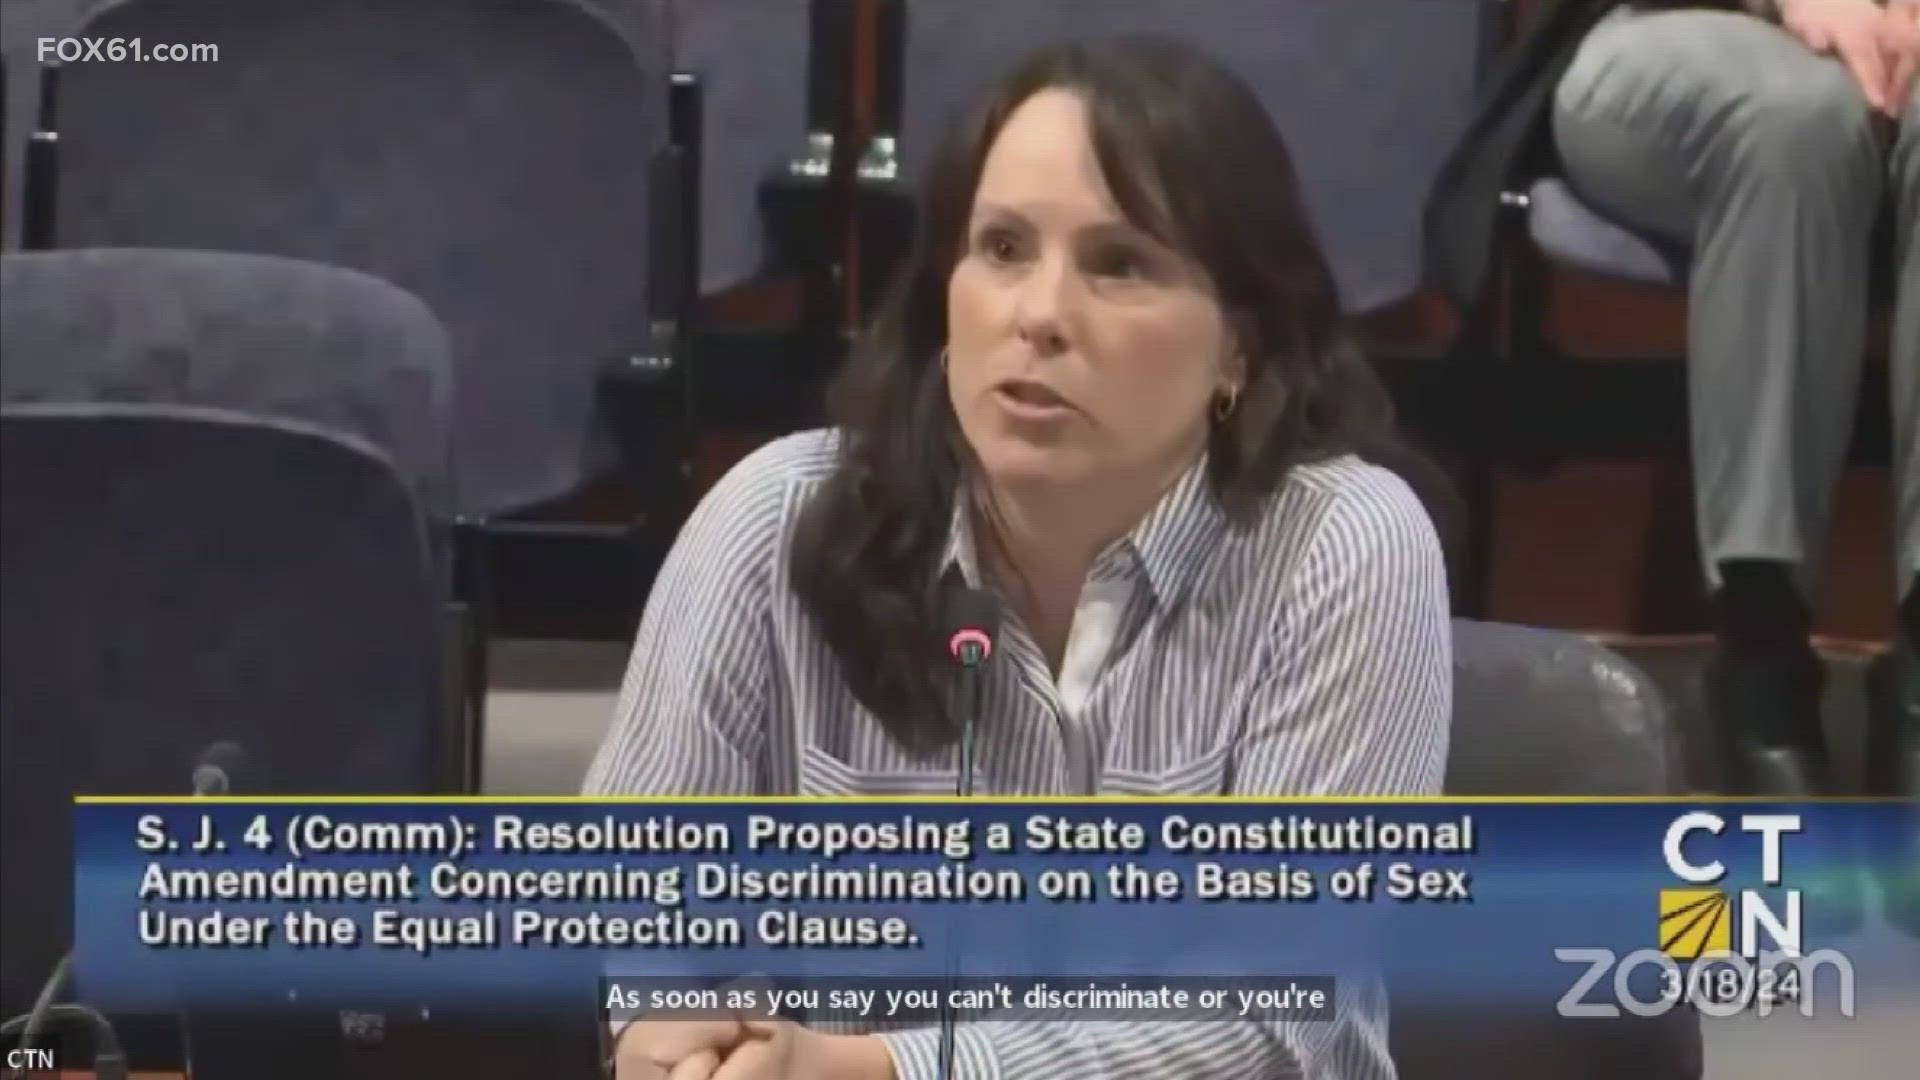 FOX61's Emma Wulfhorst heard from state lawmakers about their thoughts on the proposal that would add a line regarding equal protection to the state constitution.